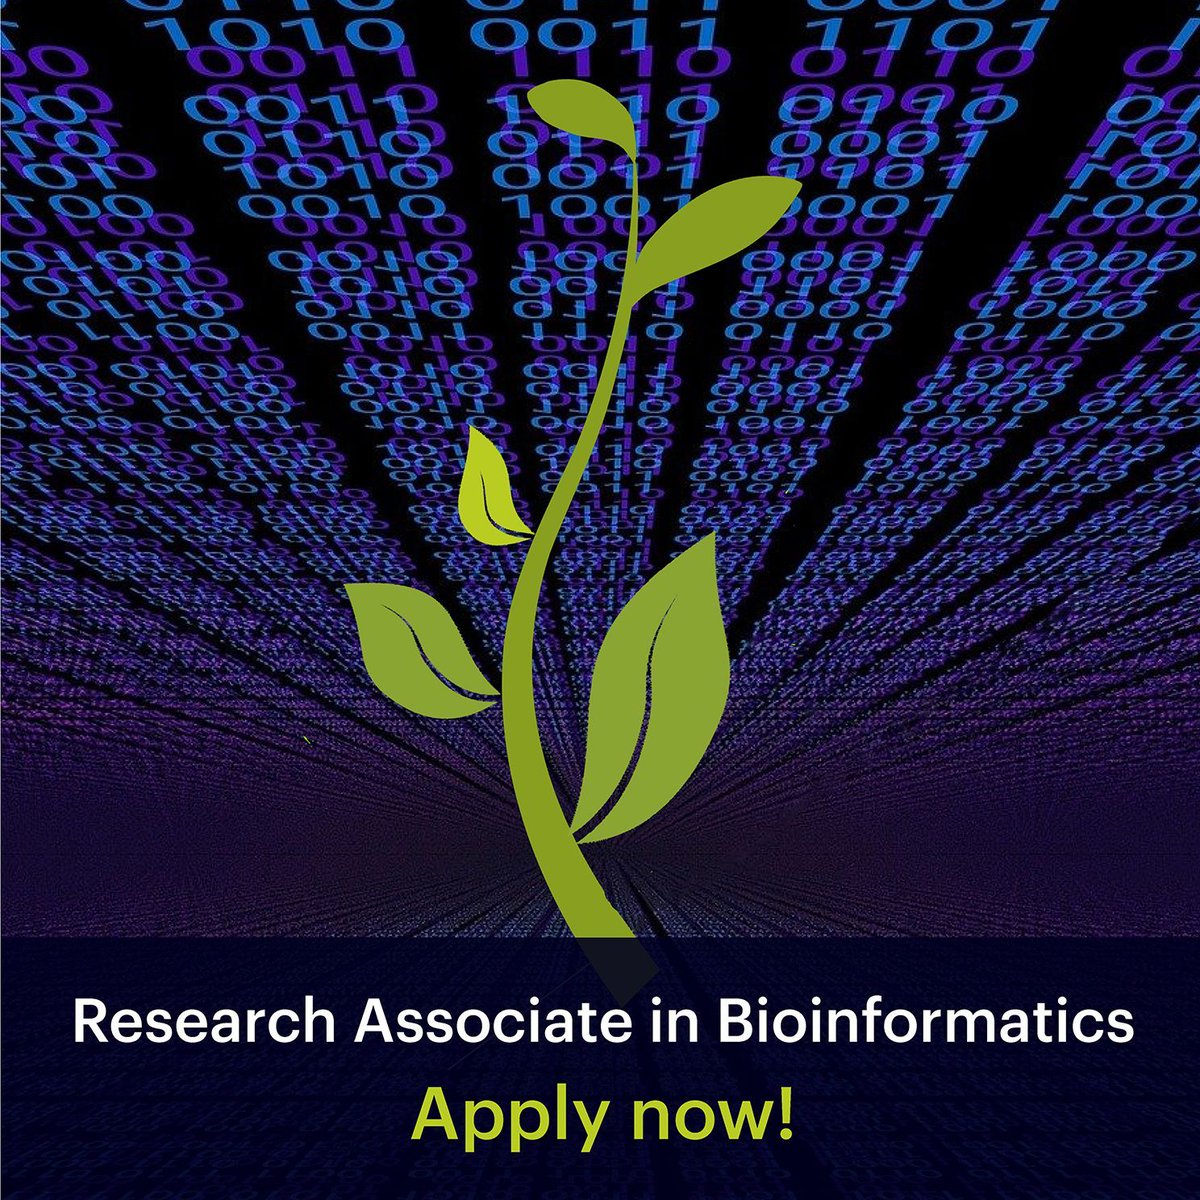 We are looking for a research associate in the field of bioinformatics/metabolomics. You will help us to develop methods for processing and interpreting mass spectrometry data in the context of plant biochemistry. More info: 👀 buff.ly/4auqL7c @sneumannoffice